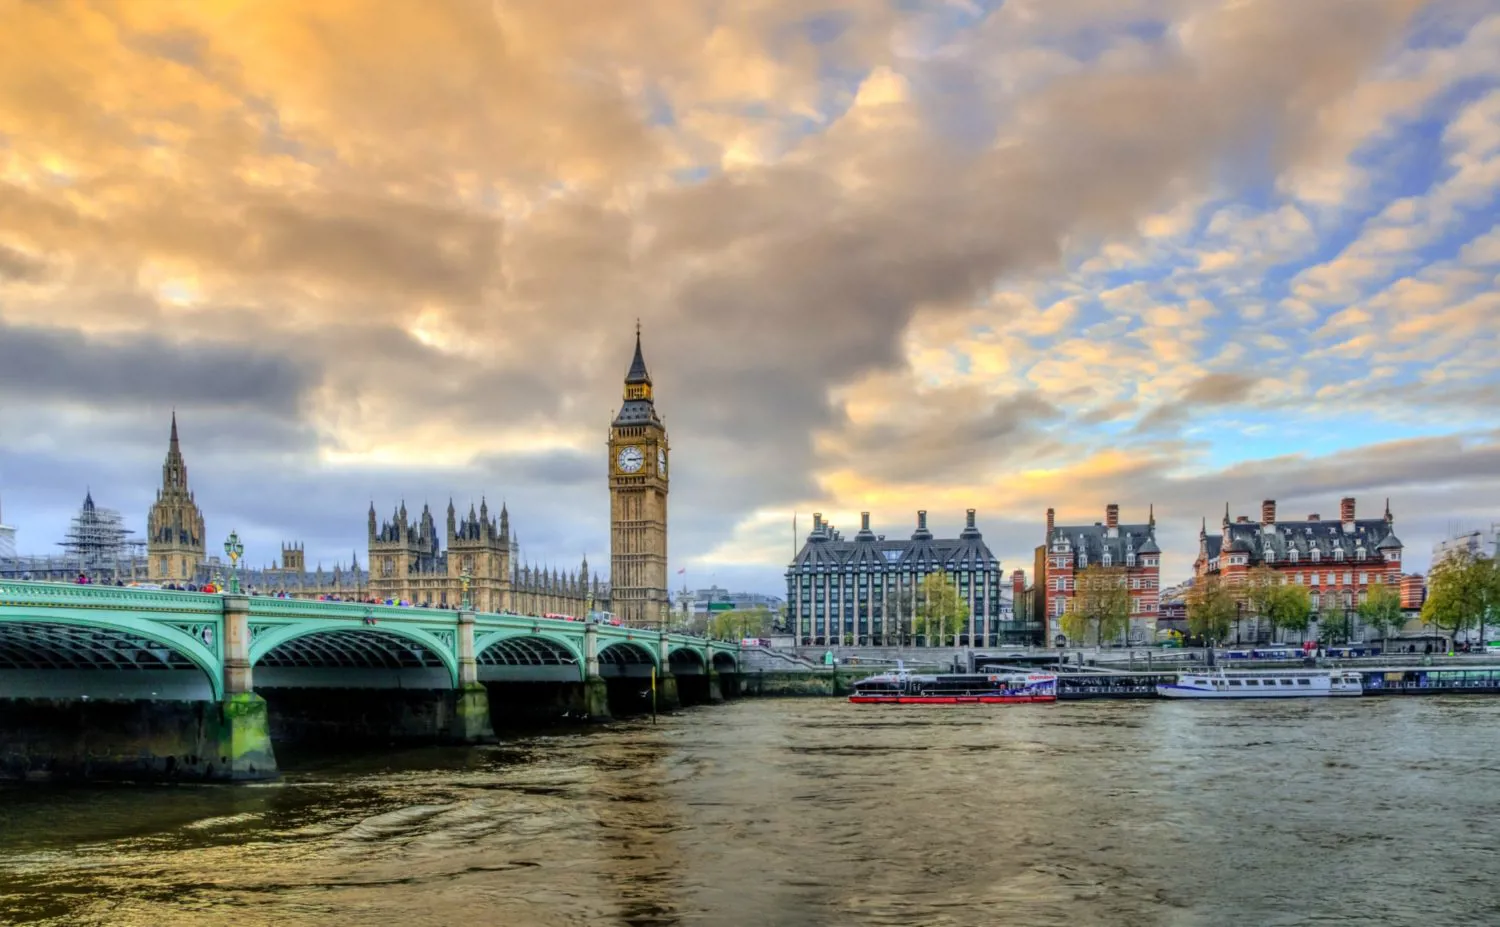 An image of the Houses of Parliament